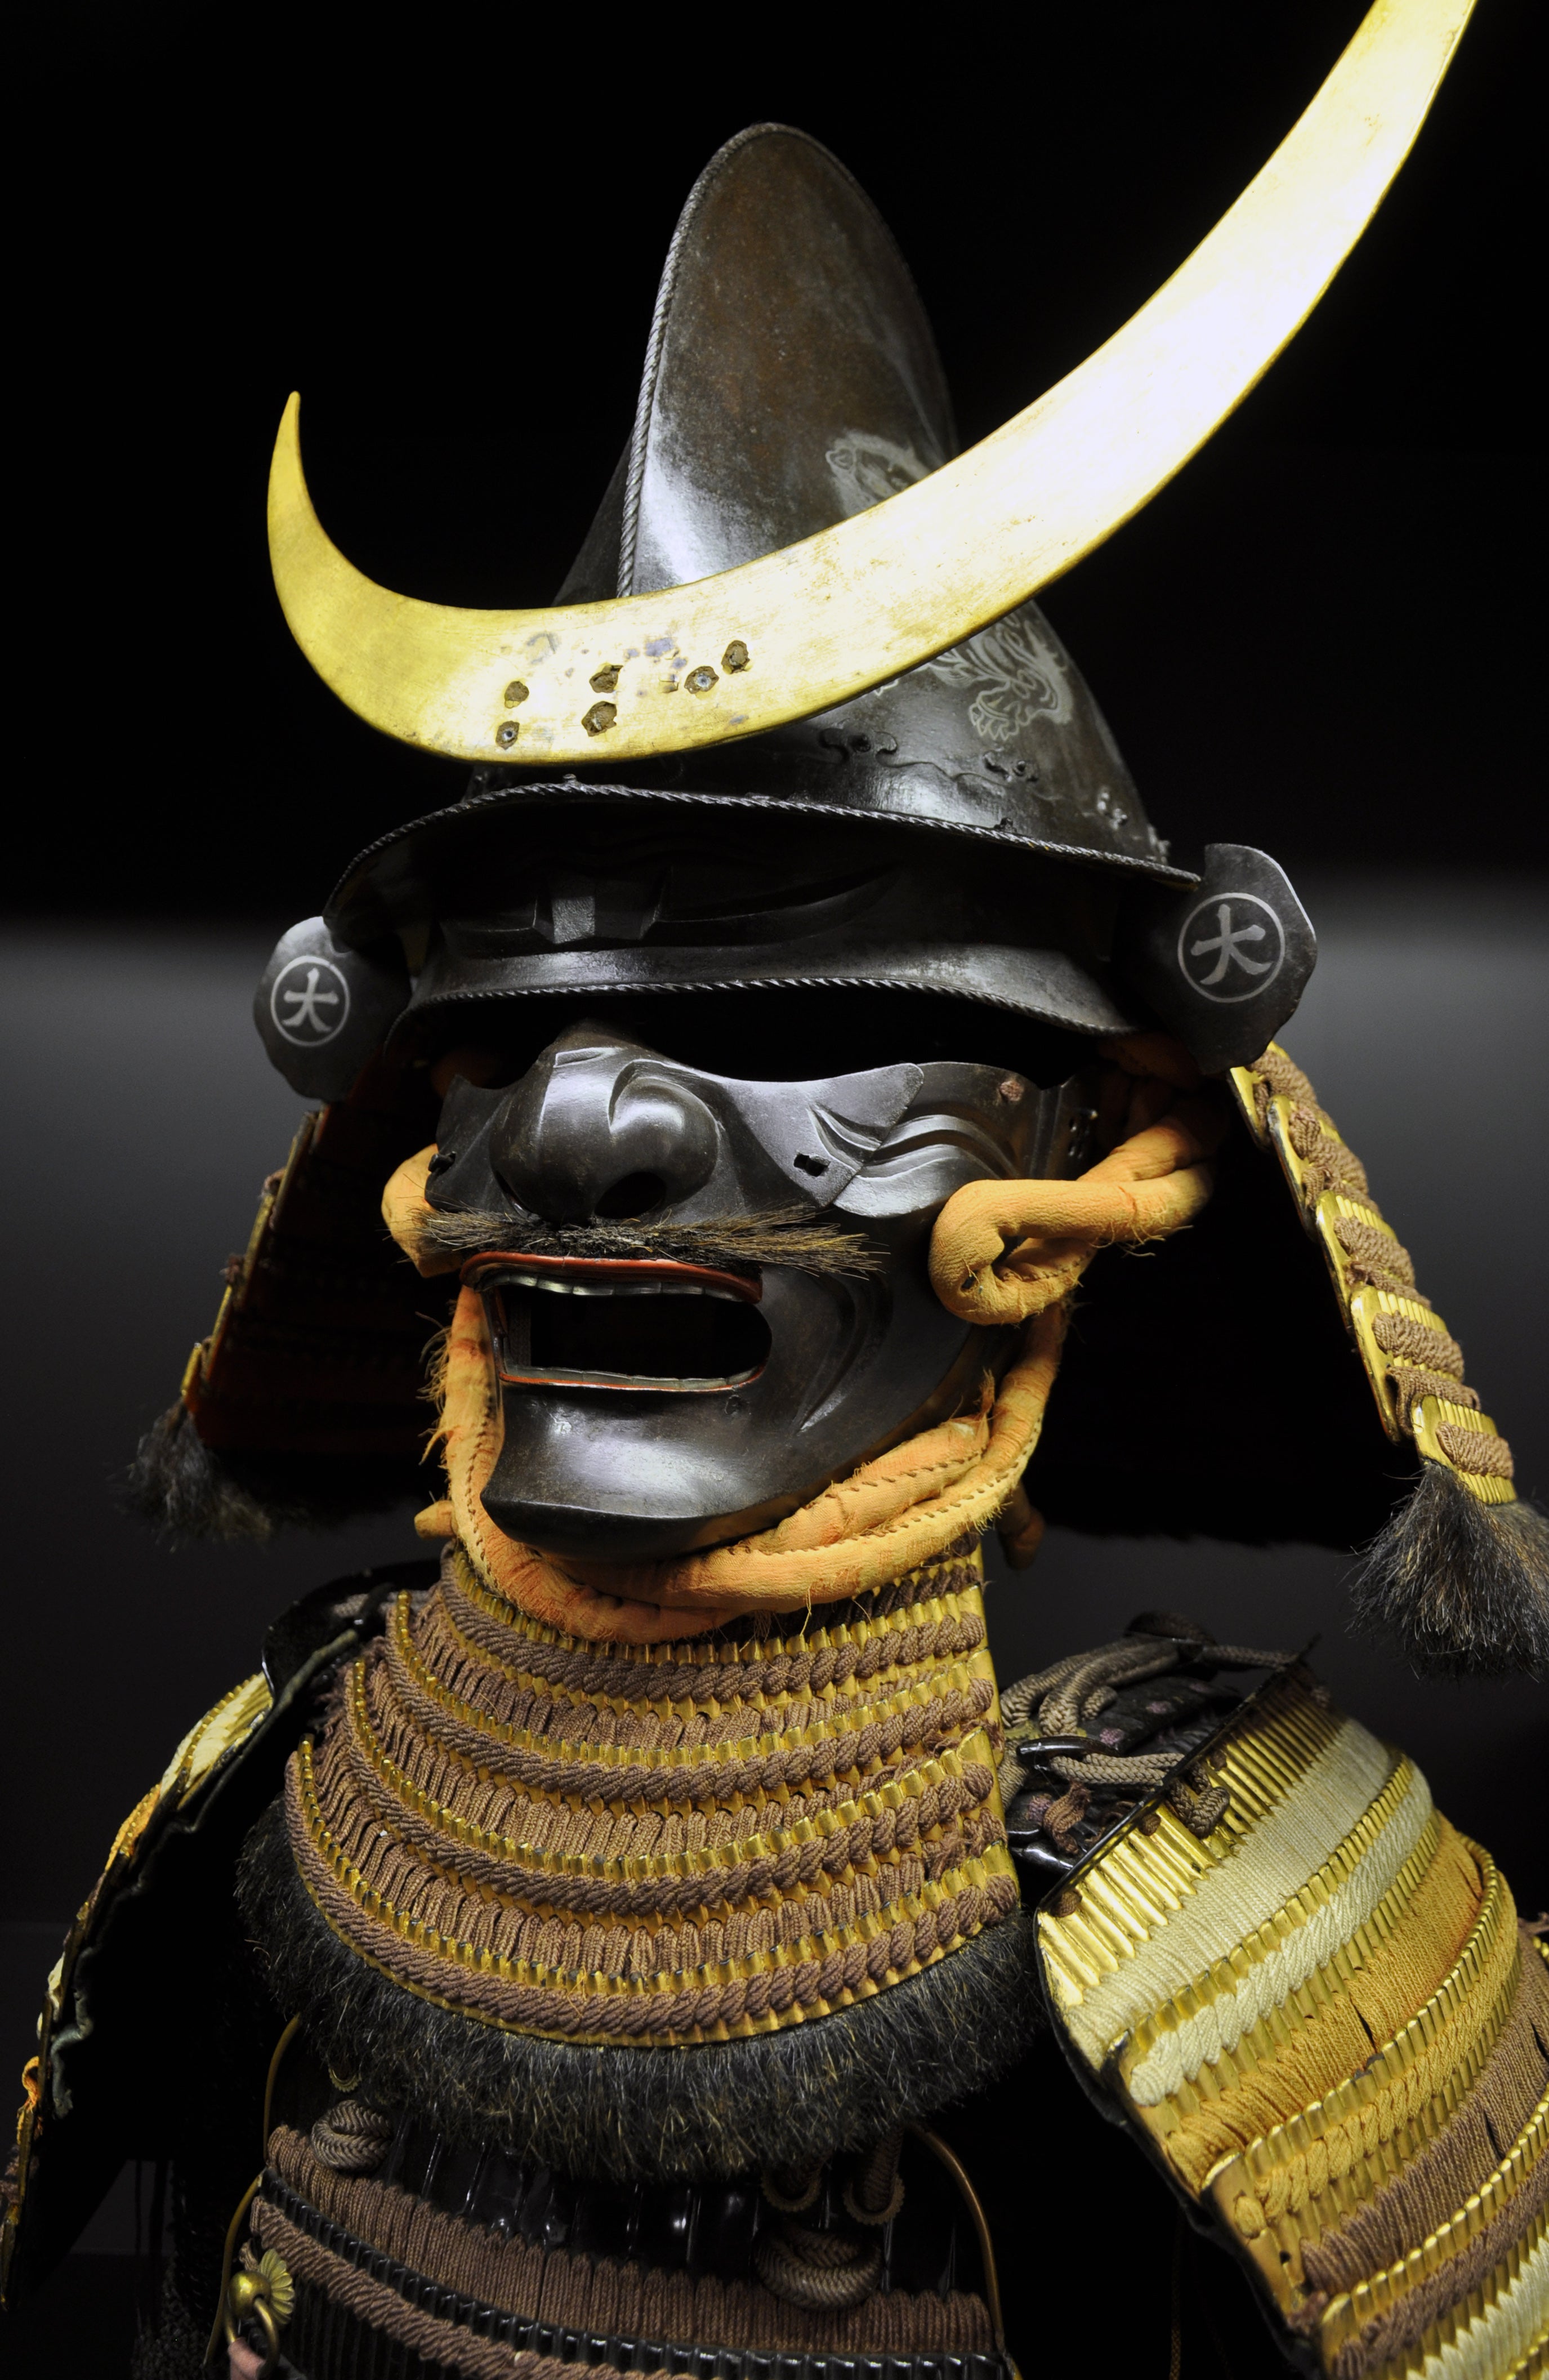 Common Myths and Misconceptions About Japanese Samurai